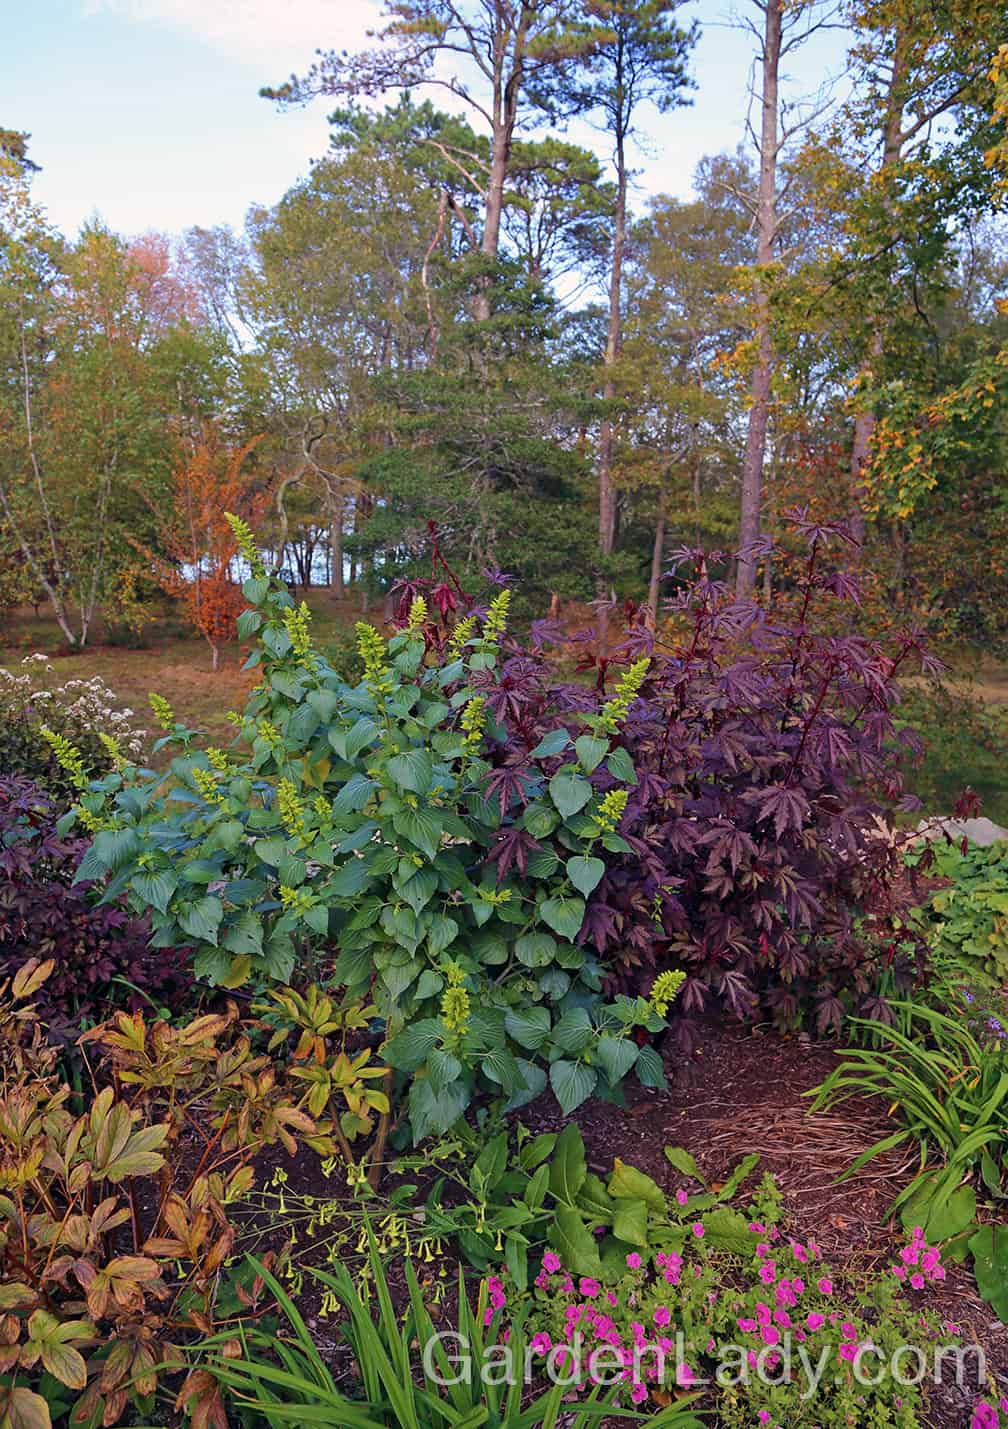 Other annuals for cold-climate fall gardens are Salvia mexicana 'Limelight' and Hibiscus acetosella. The salvia starts to become showy as the lime-green bracts form, soon to be ornamented with bright blue flowers. When this plant is placed next to the burgundy-leaved Hibiscus acetosella, you have an eye-catching combination. 